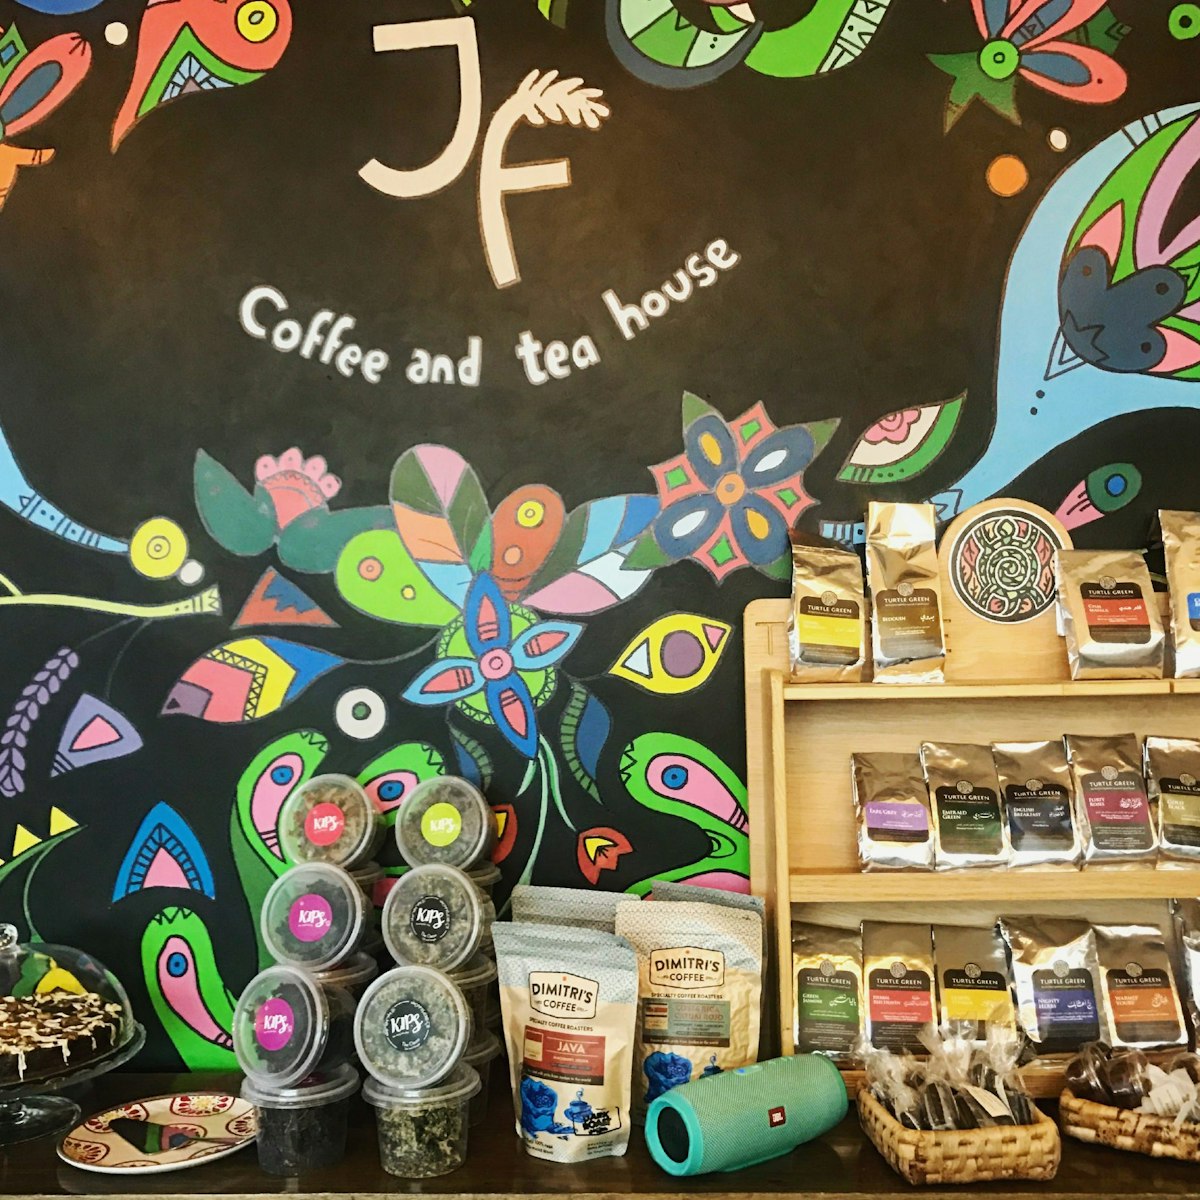 Jungle Fever serves locally made coffees, teas, sweets, and treats